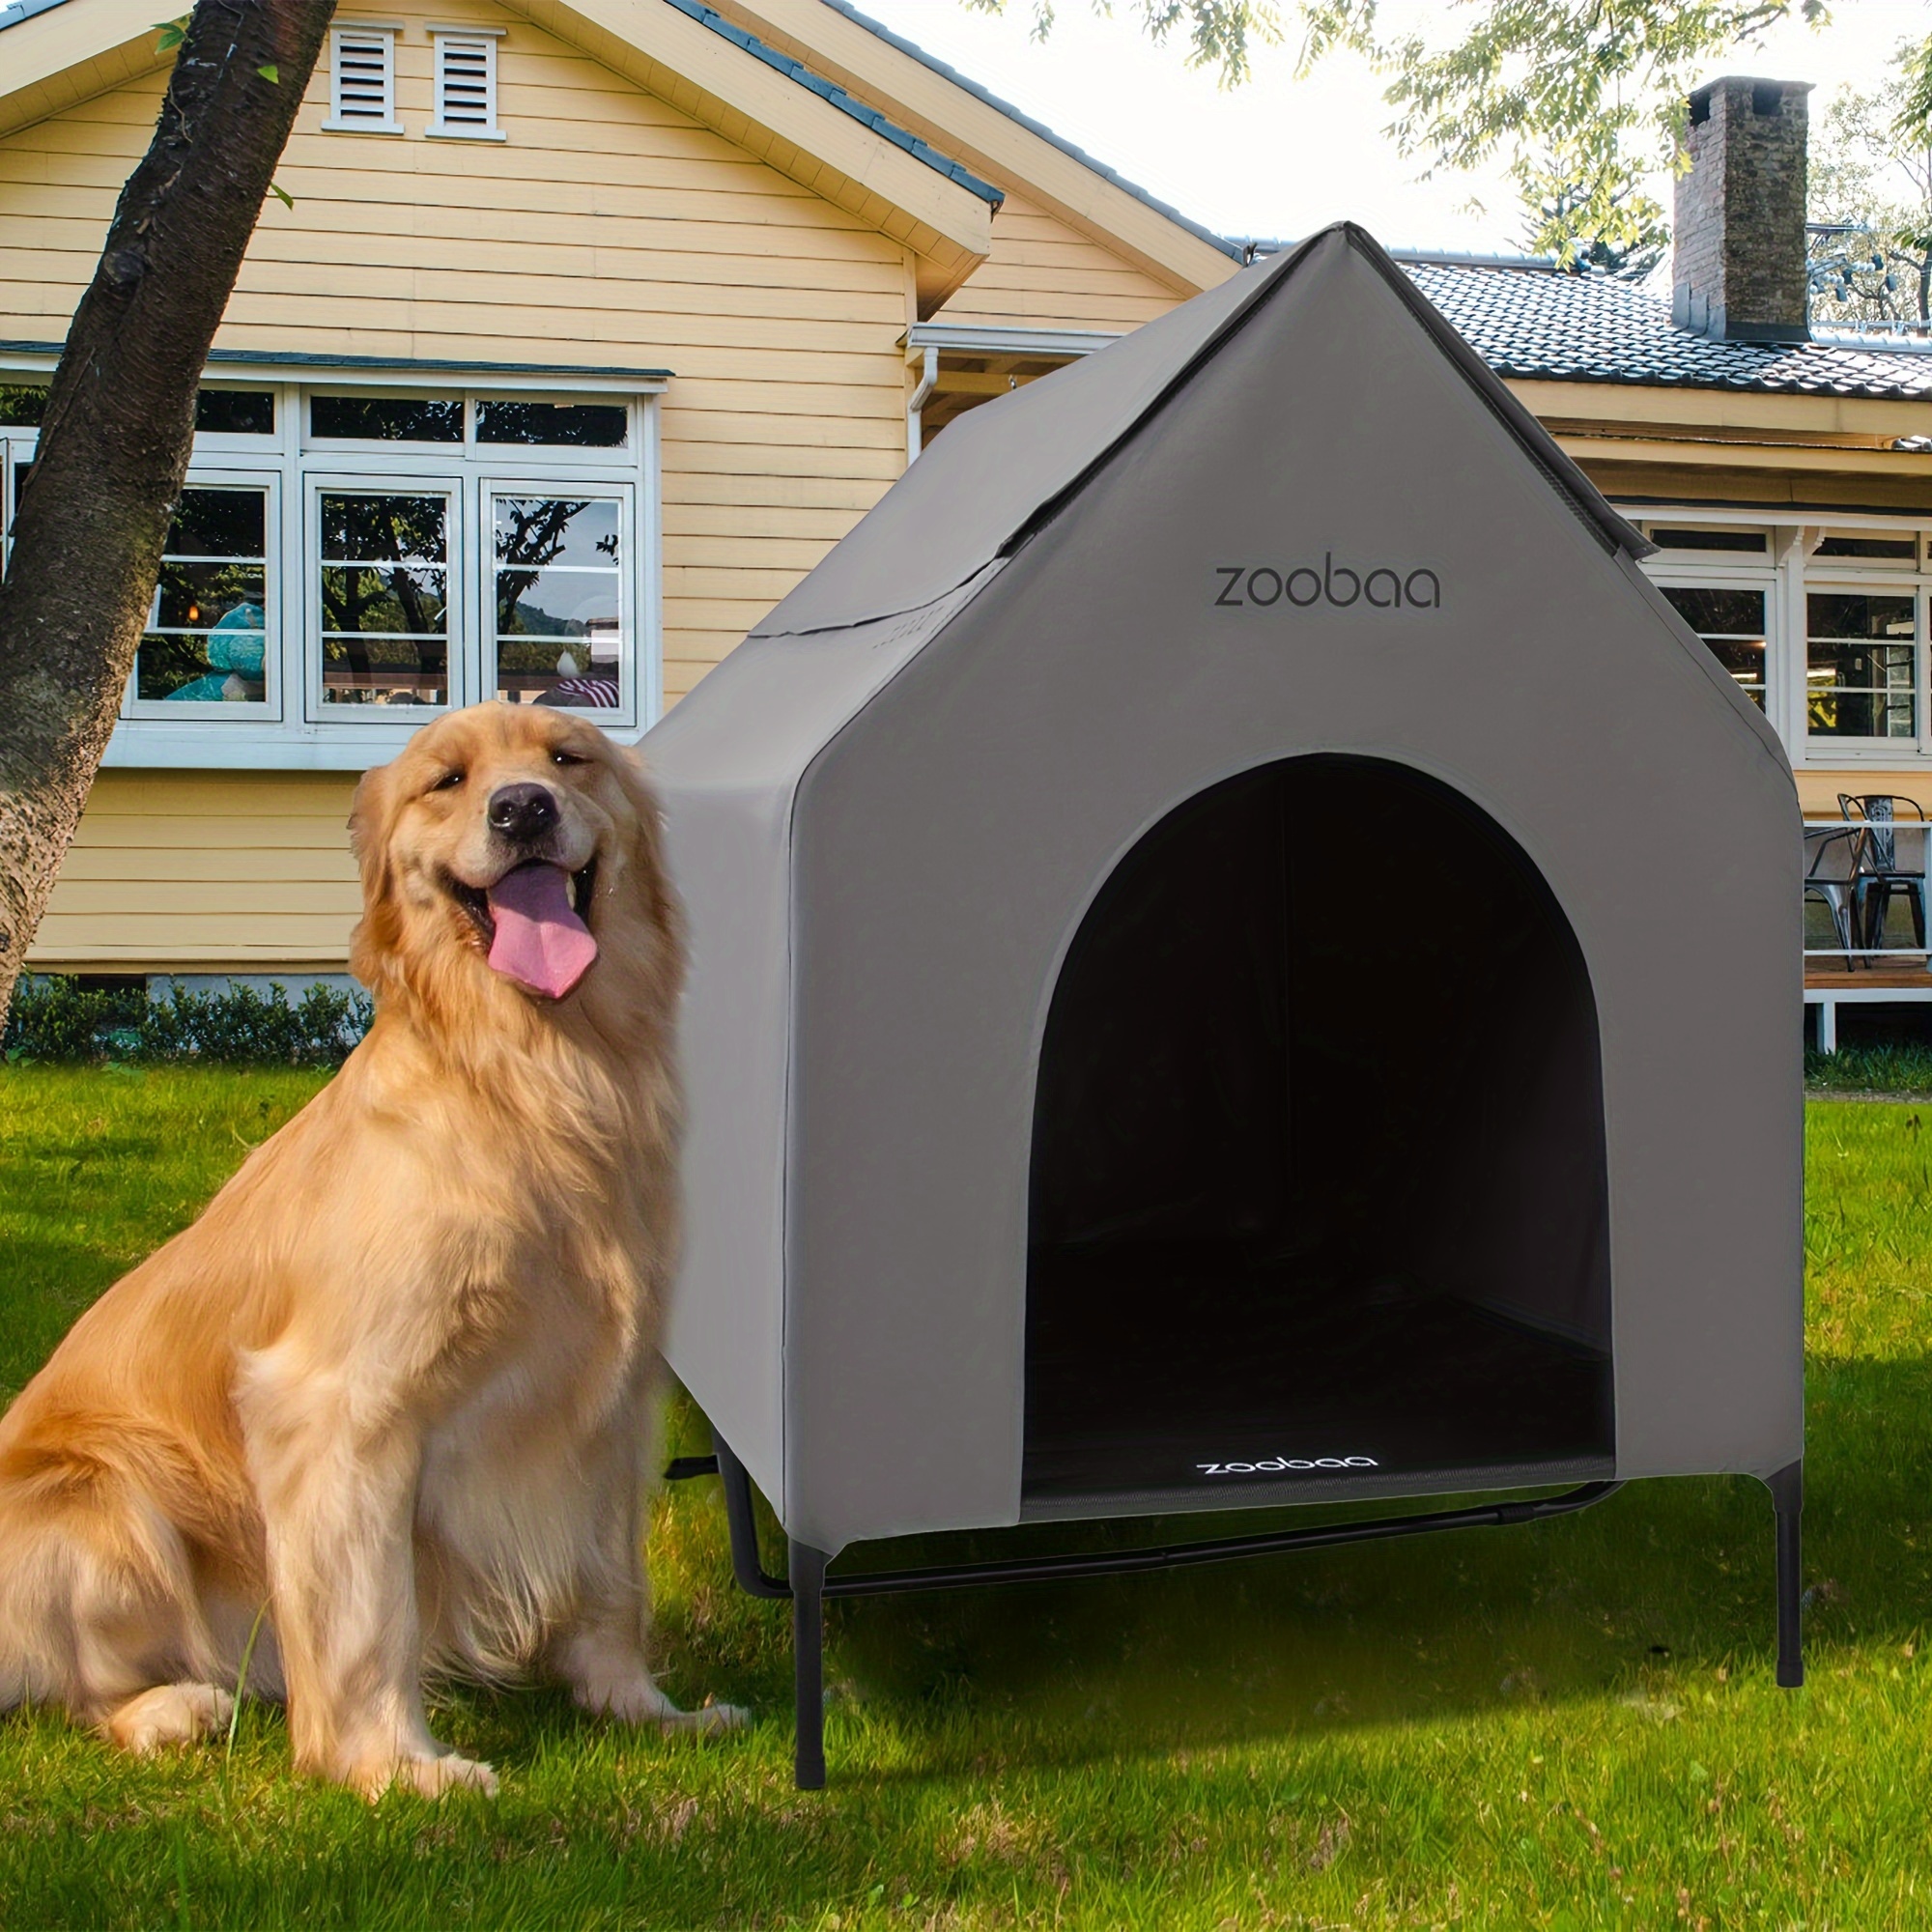 

Zooba Dog House, Dog House For Large Dogs Indoor Or Outside, Weatherproof 600d Pvc Dog House Outdoor, Featuring Breathable 2x1 Textilene Elevated Dog Cooling Bed, Easy To Clean